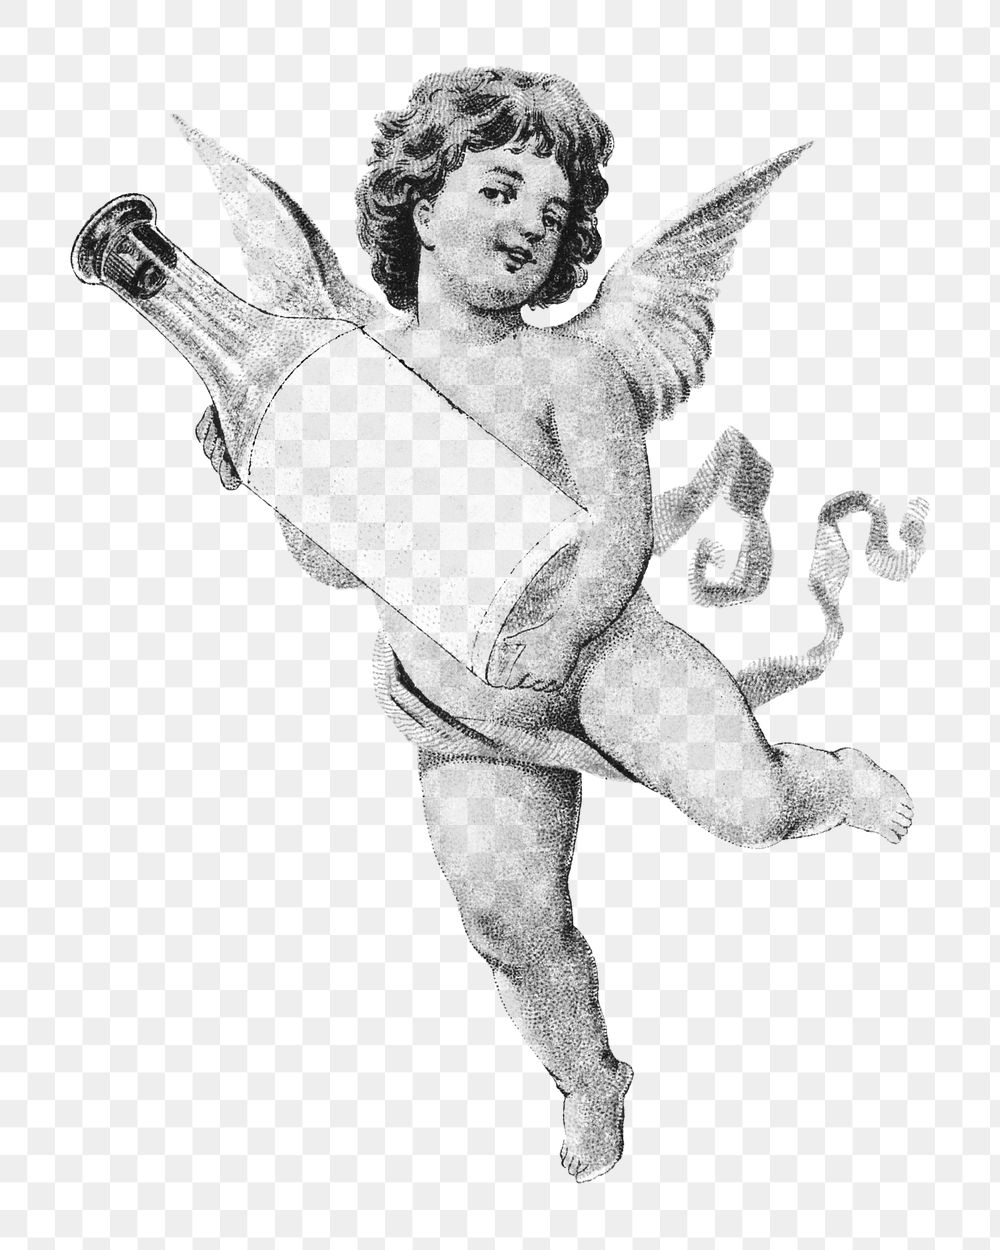 Cherub png holding perfume bottle, vintage illustration on transparent background. Remixed by rawpixel.